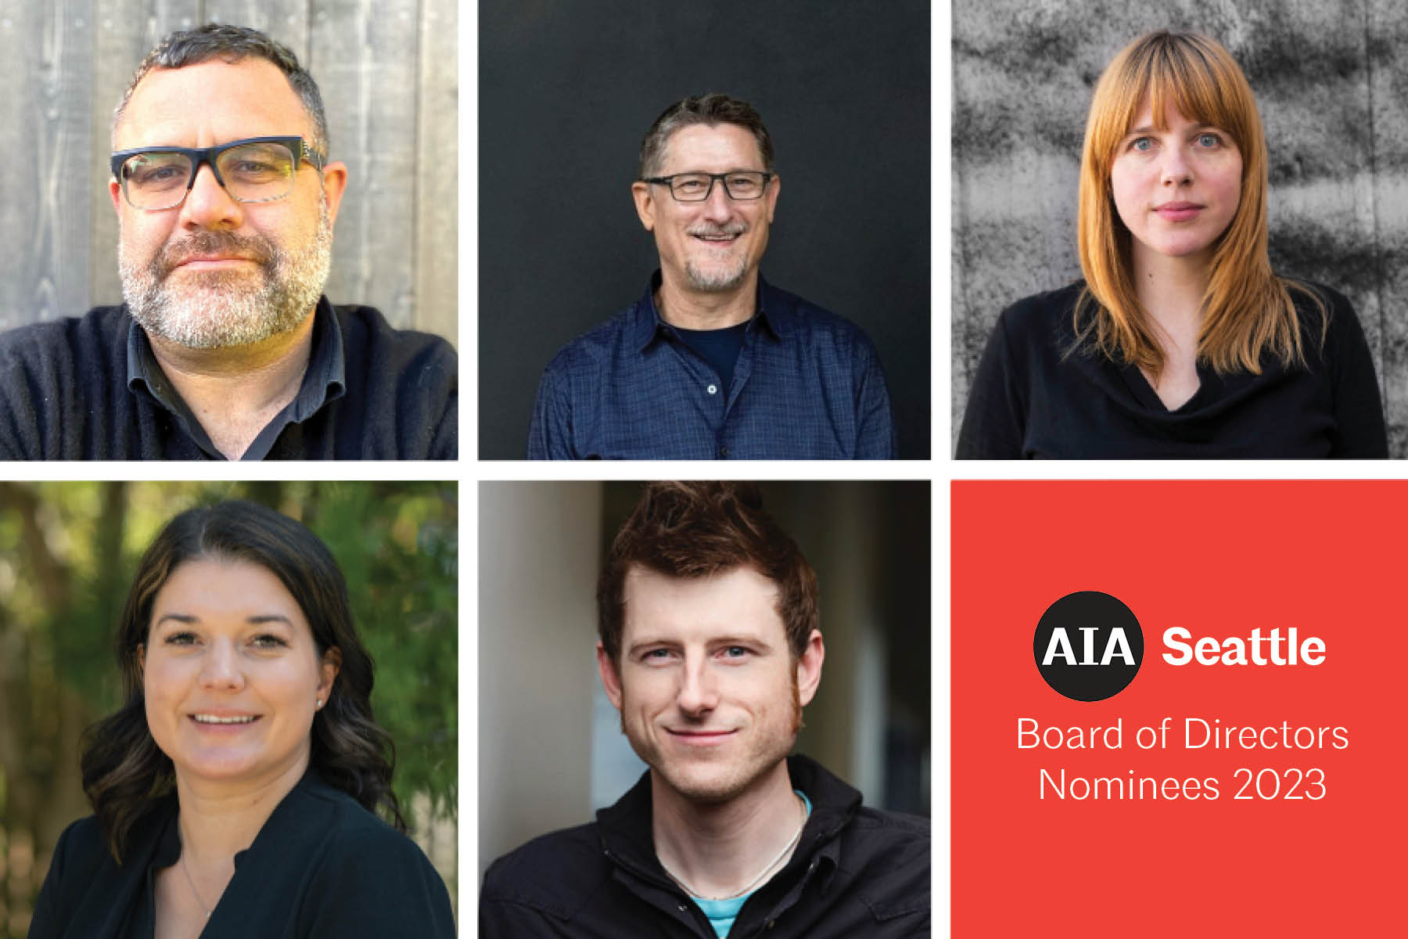 AIA Seattle is a member-led organization that depends on volunteer leadership and initiative. We are deeply grateful for the enormous energy and effort our board members and other volunteer leaders devote to our organization.